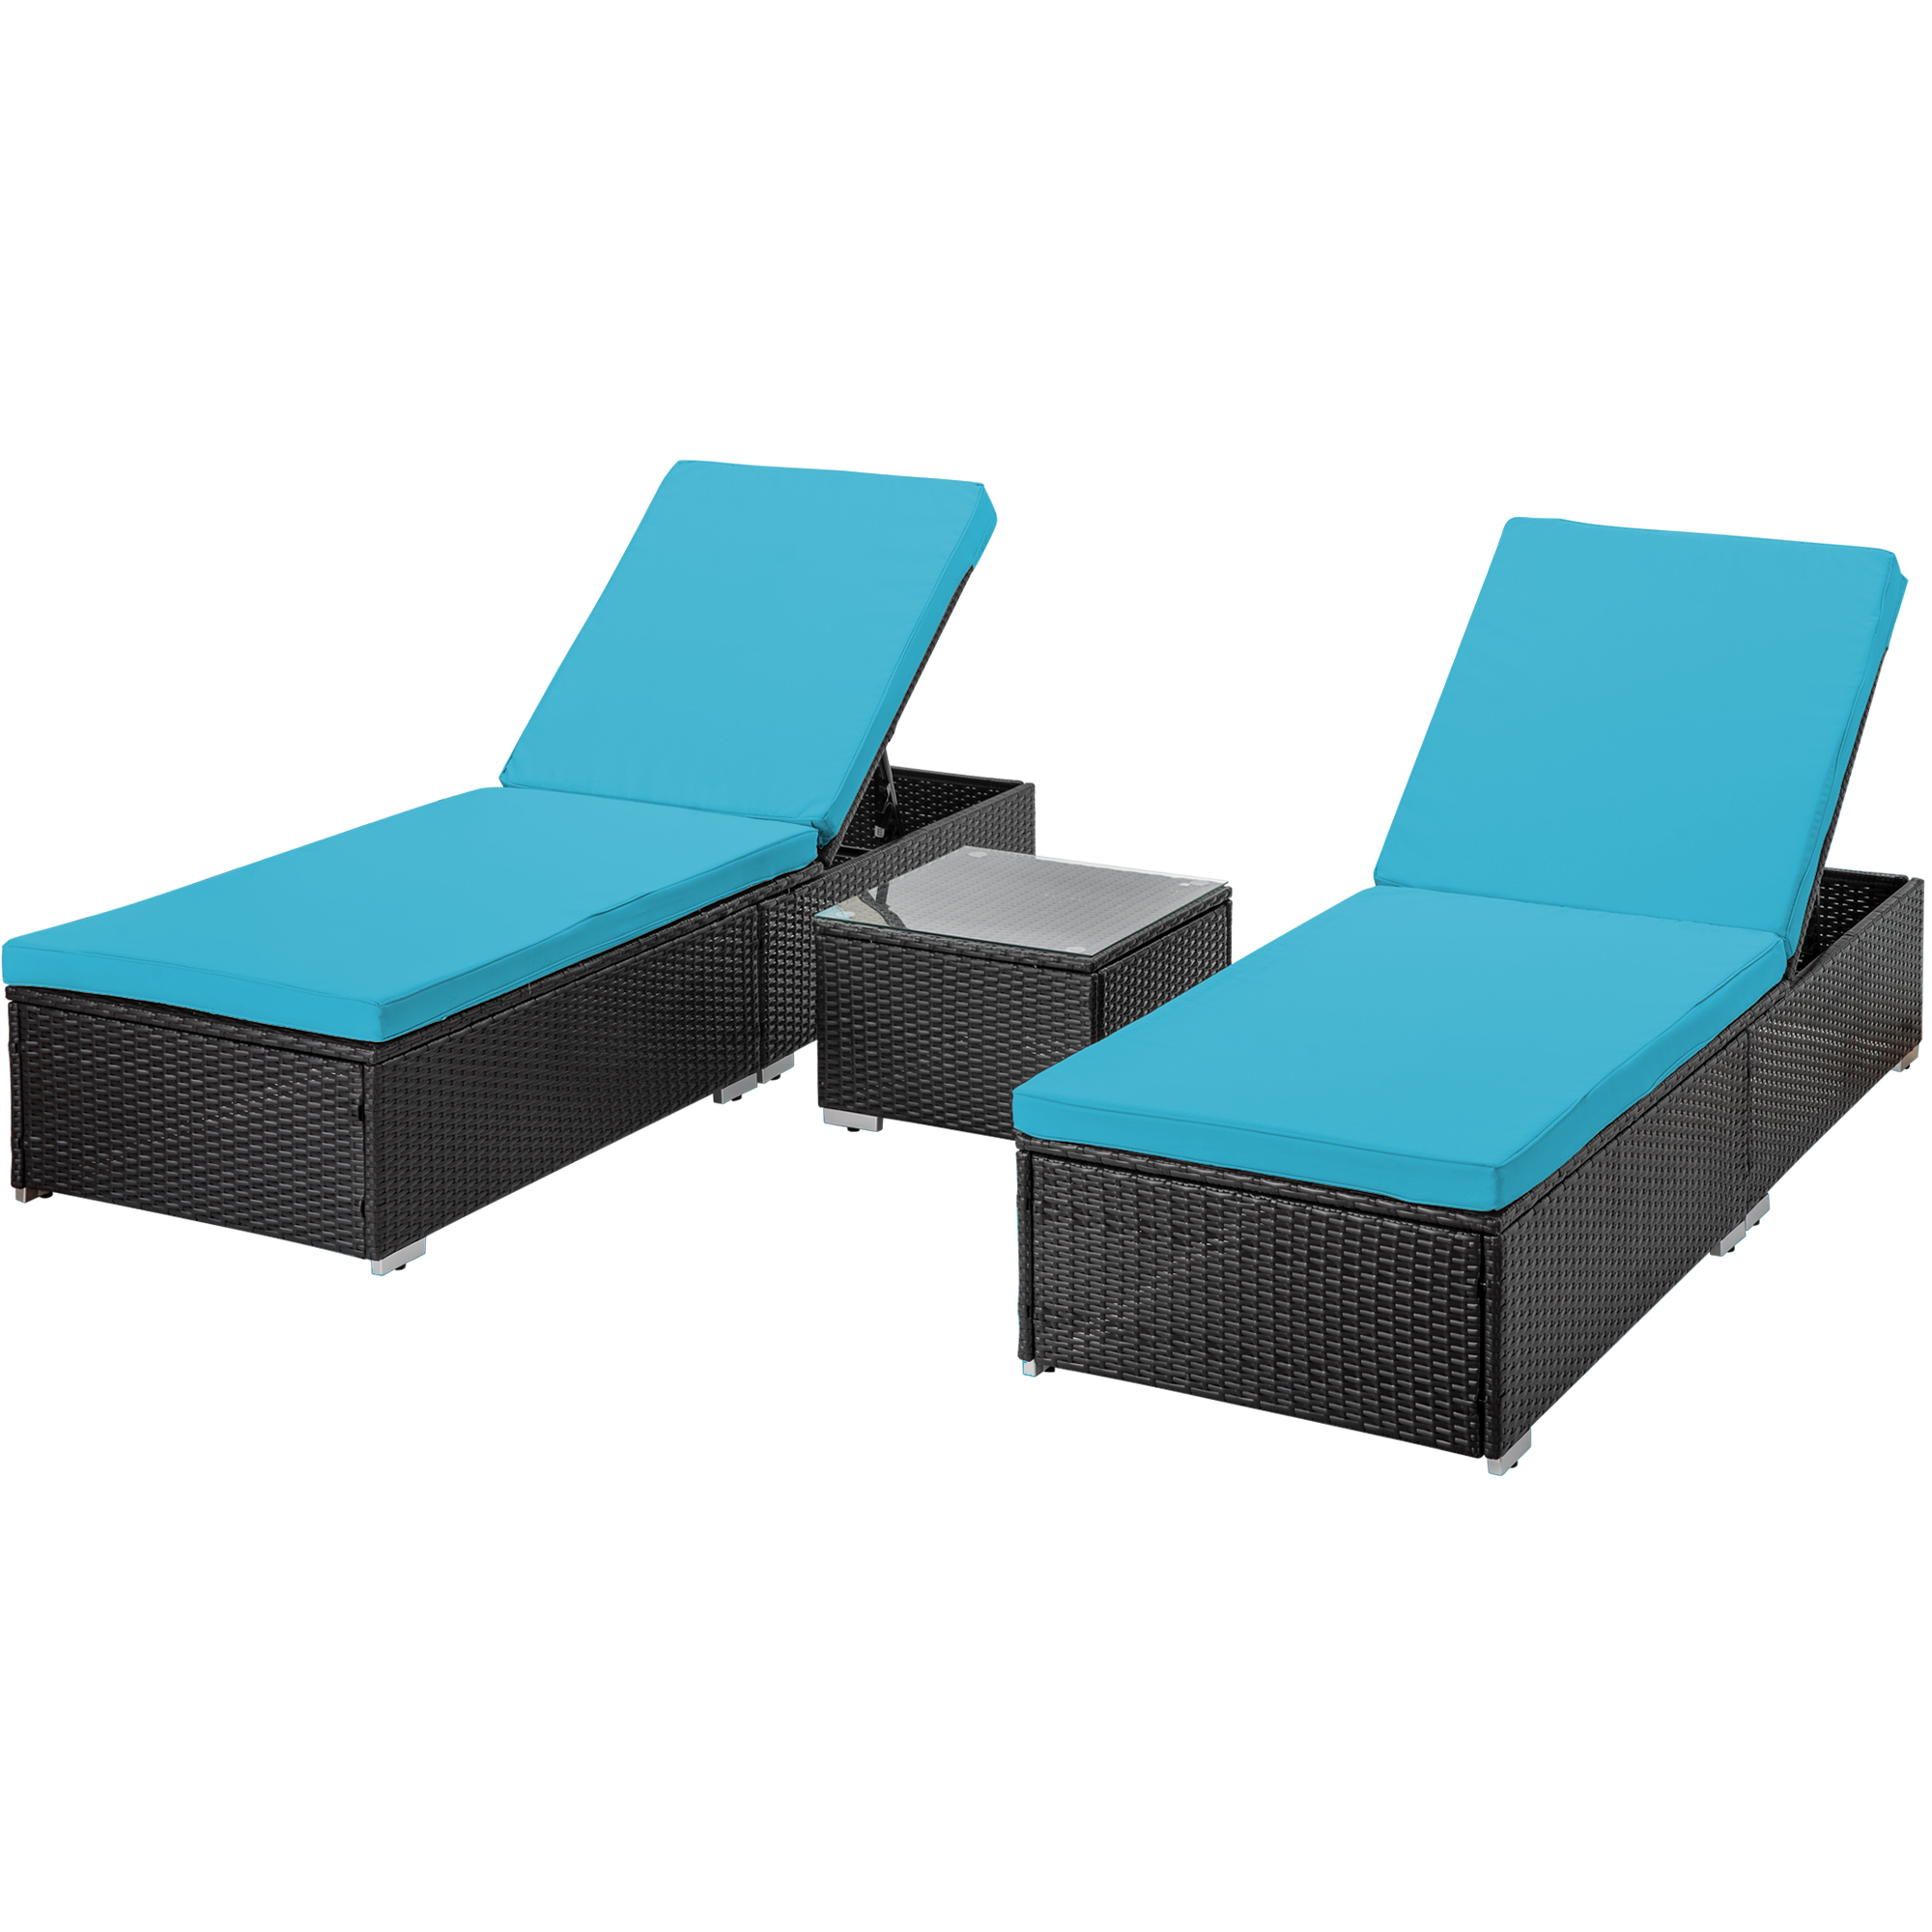 Segmart Outdoor Patio Lounge Furniture Set, 3 Pieces Adjustable Wicker Chaise Chairs for Outside, Poolside Folding Chaise Lounge Set with Cushions and Coffee Table - image 1 of 10